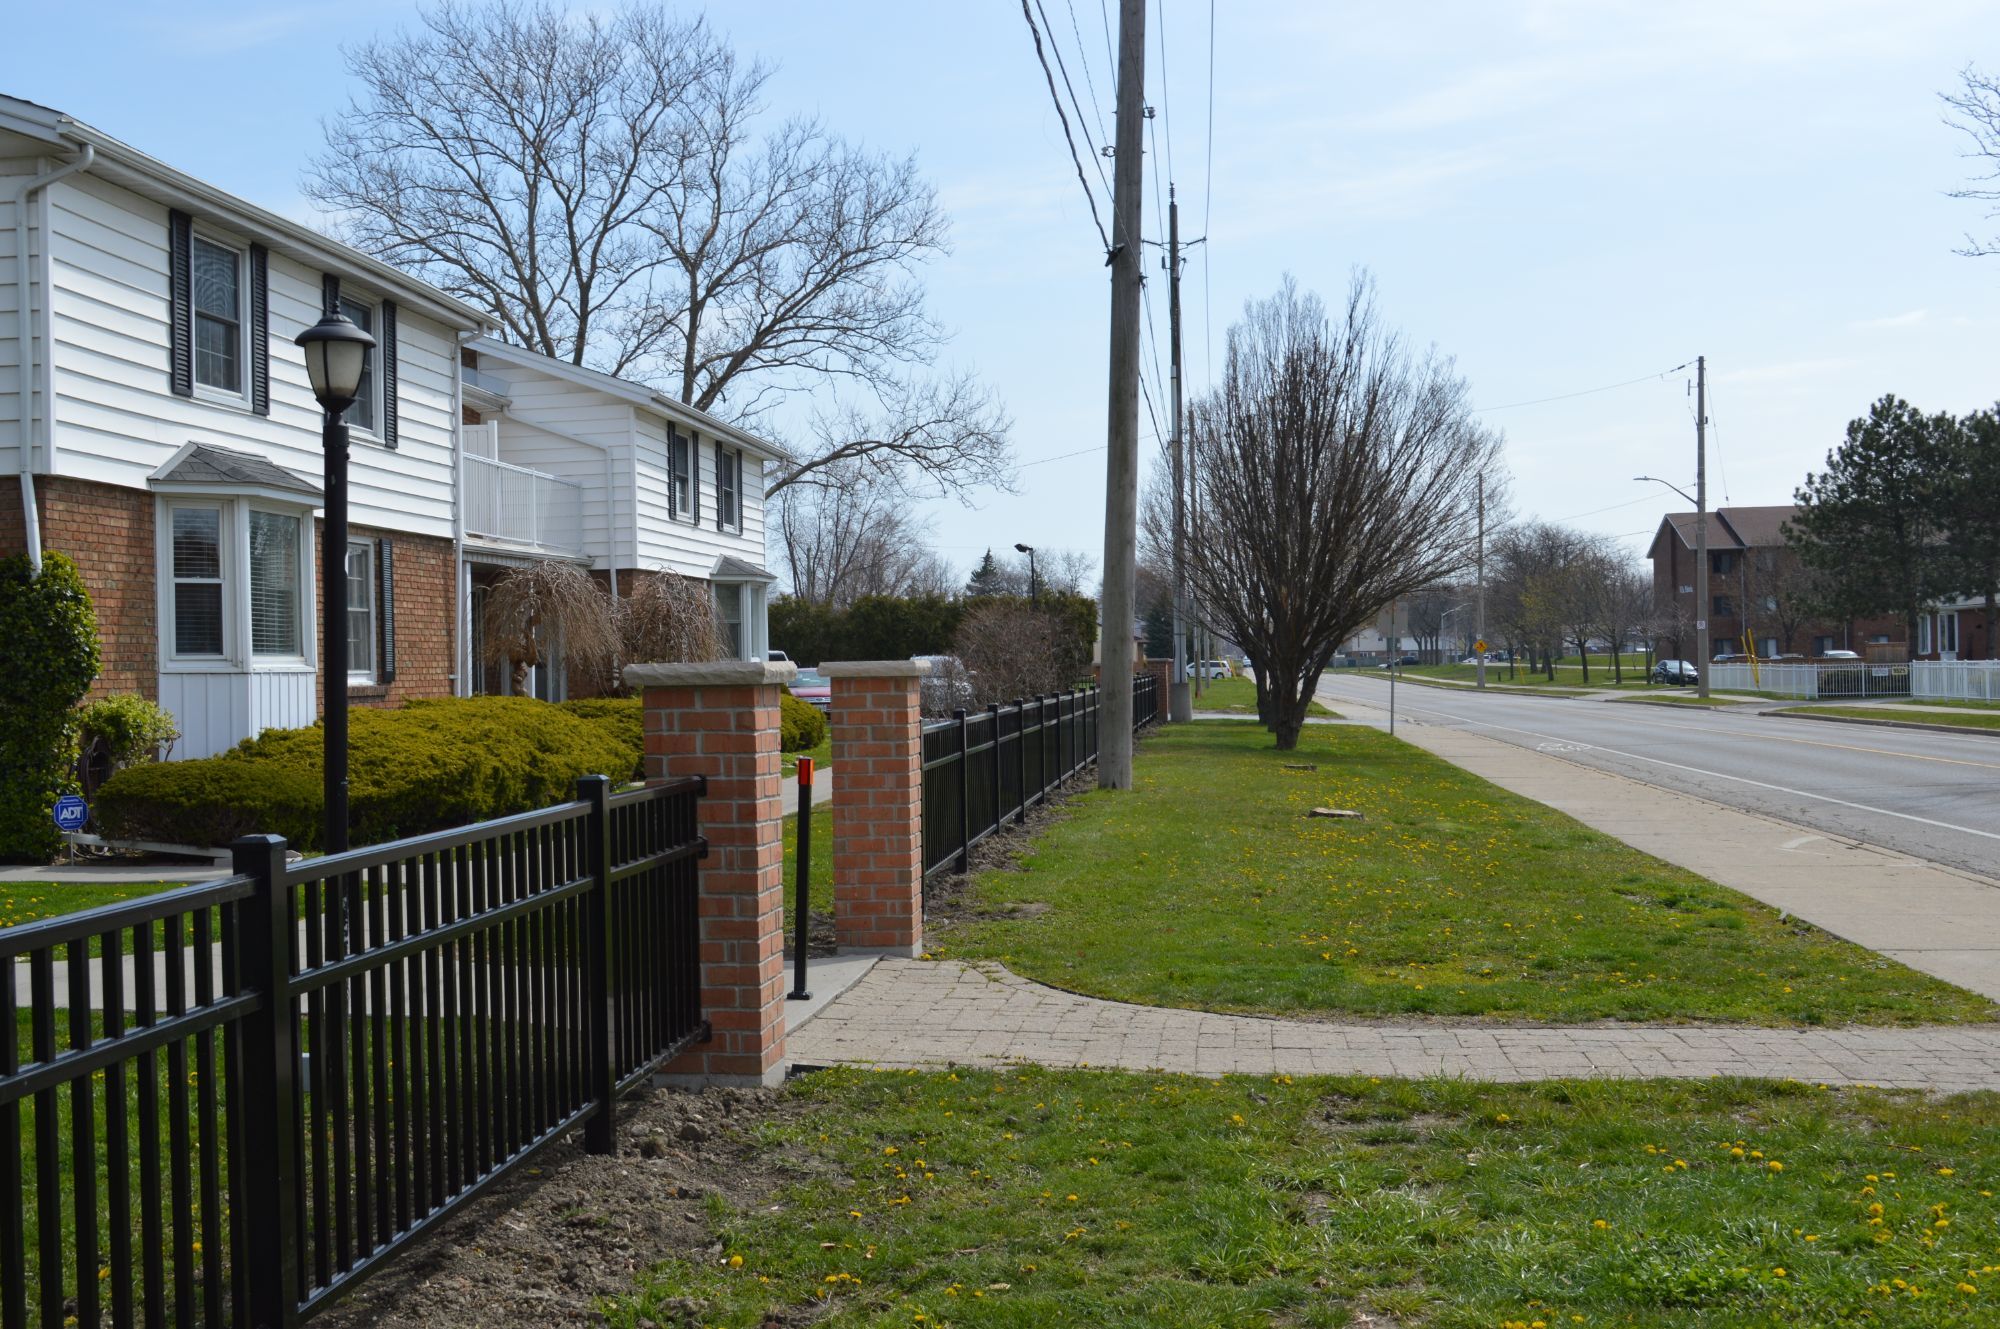 Bringing up the neighborhood along Little River Boulevard in Windsor, we installed this fence during the beginning of the COVID-19 pandemic. With the brick column pillars it makes a stylist statement about the class of the condominium development.